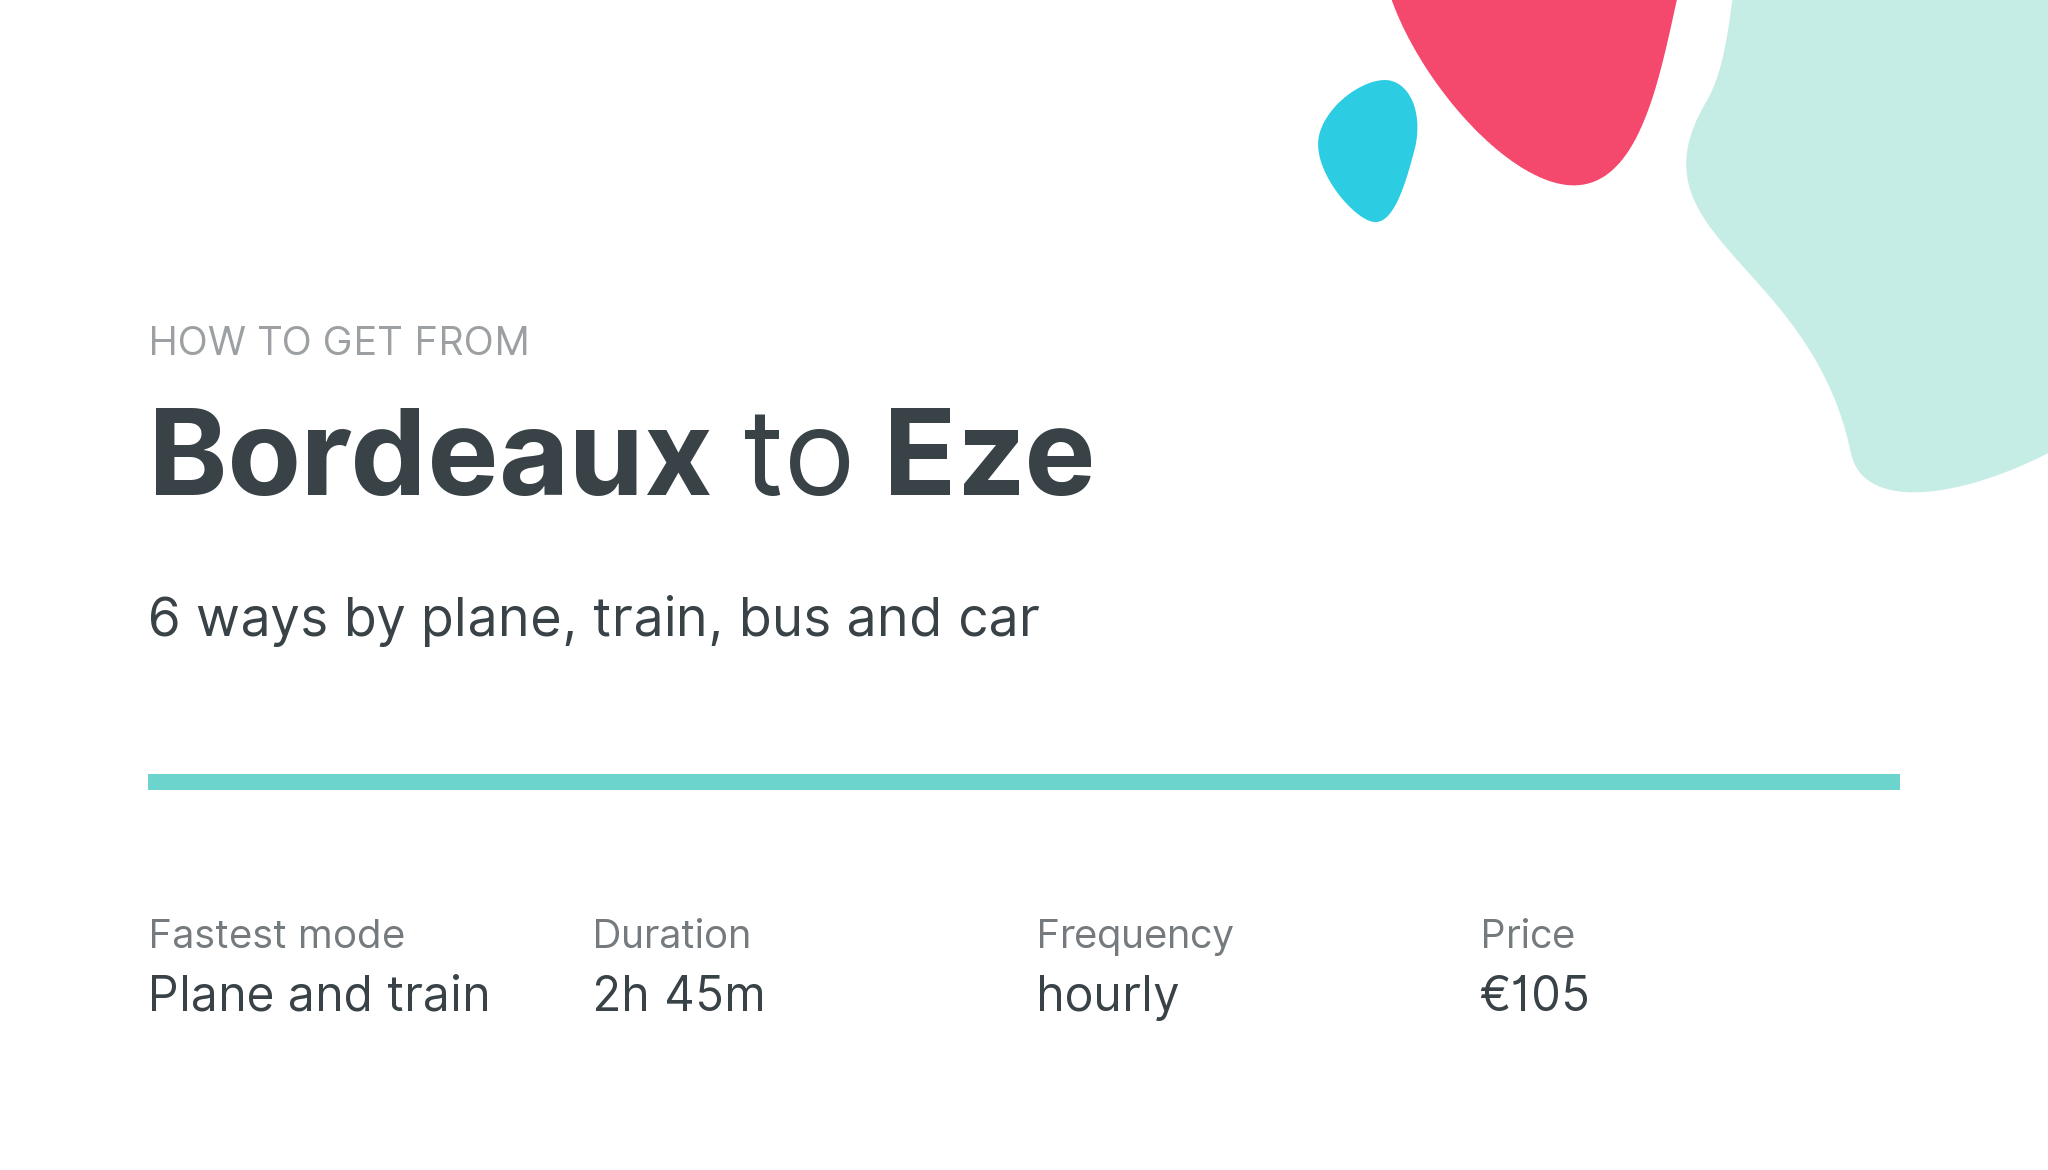 How do I get from Bordeaux to Eze